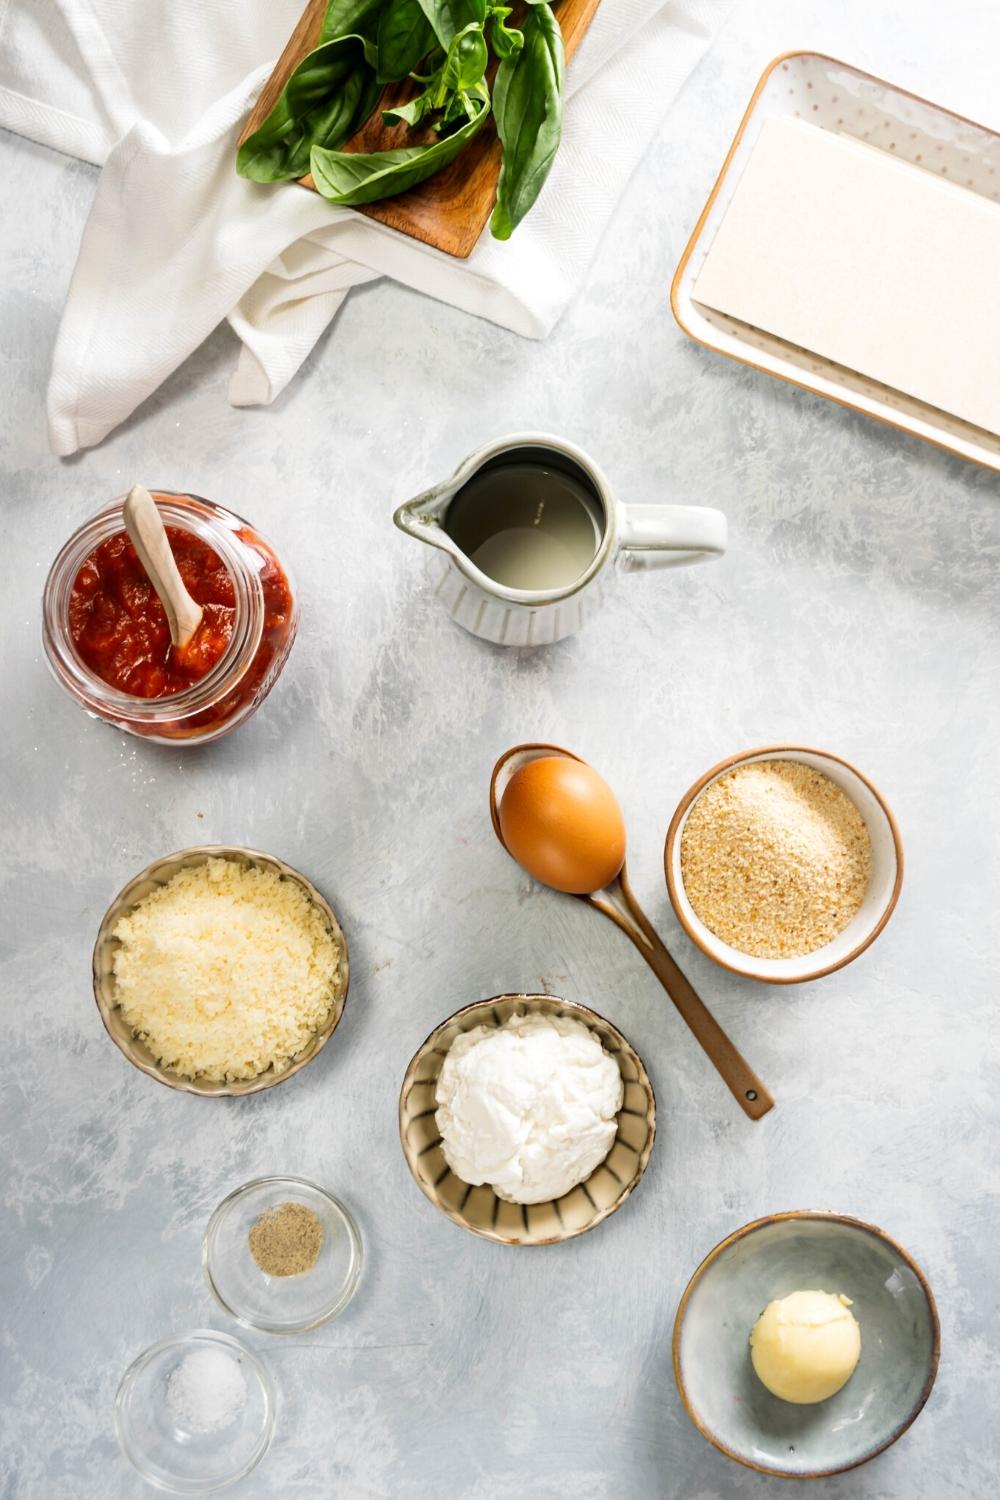 A bowl with a mozzarella cheese ball in it, a bowl of ricotta cheese, a bowl of Parmesan cheese, a bowl of breadcrumbs, an egg, a jar of tomato sauce, and a picture of water all on a gray counter.